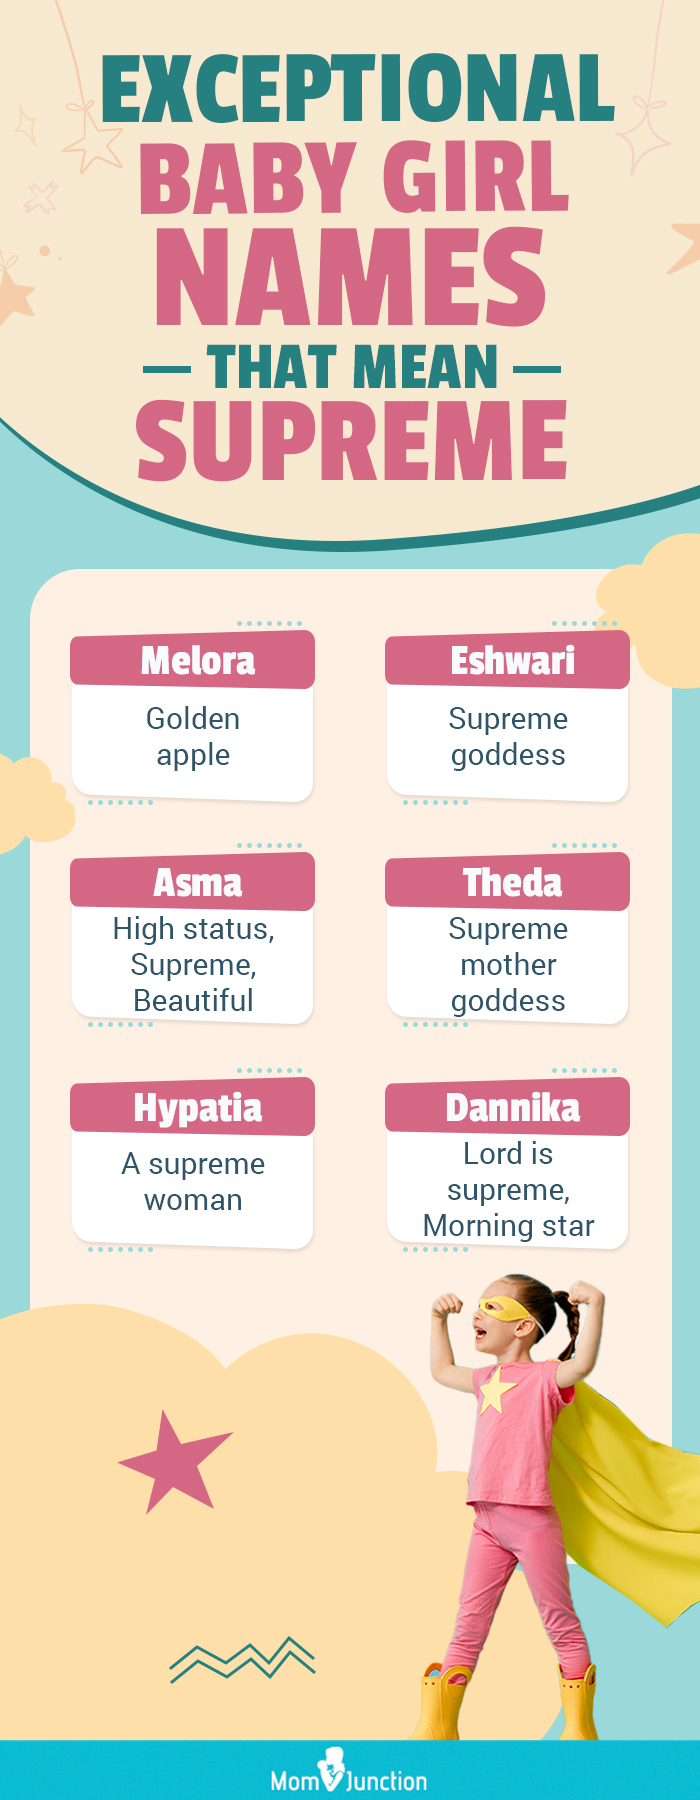 Exceptional Baby Girl Names That Mean Supreme (infographic)